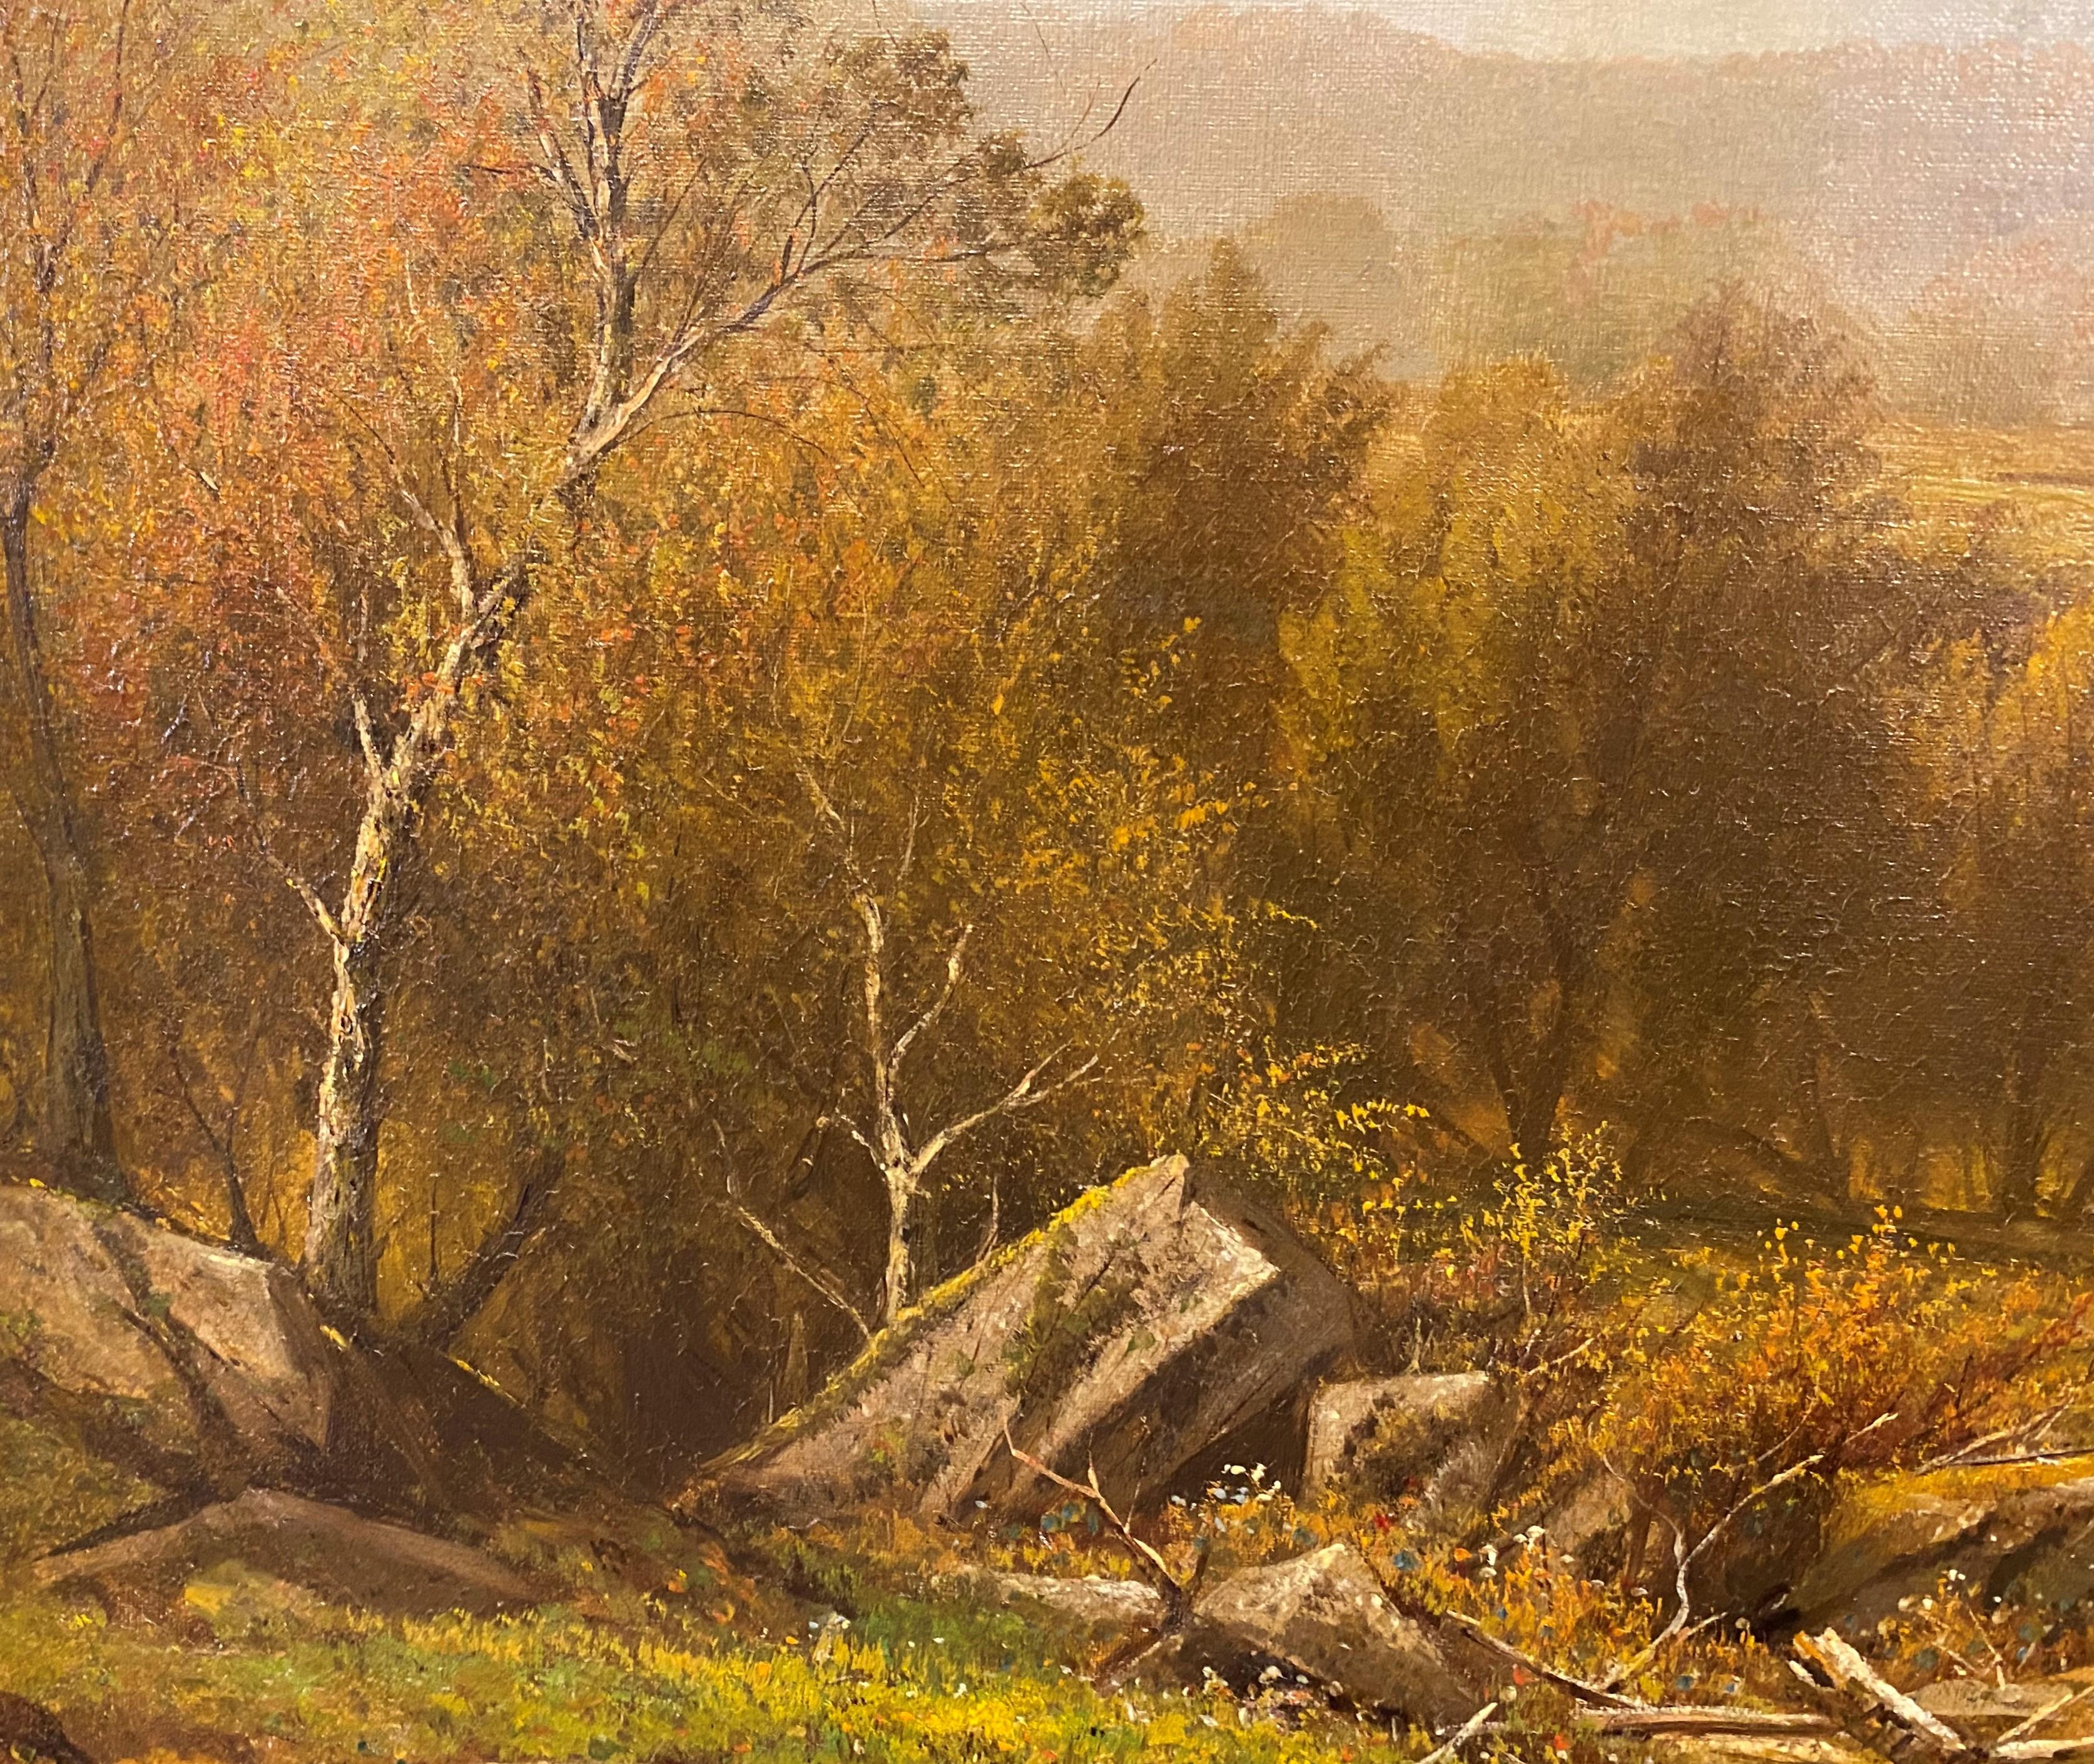 A fine valley river landscape with cows in the style of the Hudson River School by American artist Charles Wilson Knapp (1823-1900). Knapp was born in Philadelphia, where he lived most of his life, apart from two years he spent in New York.